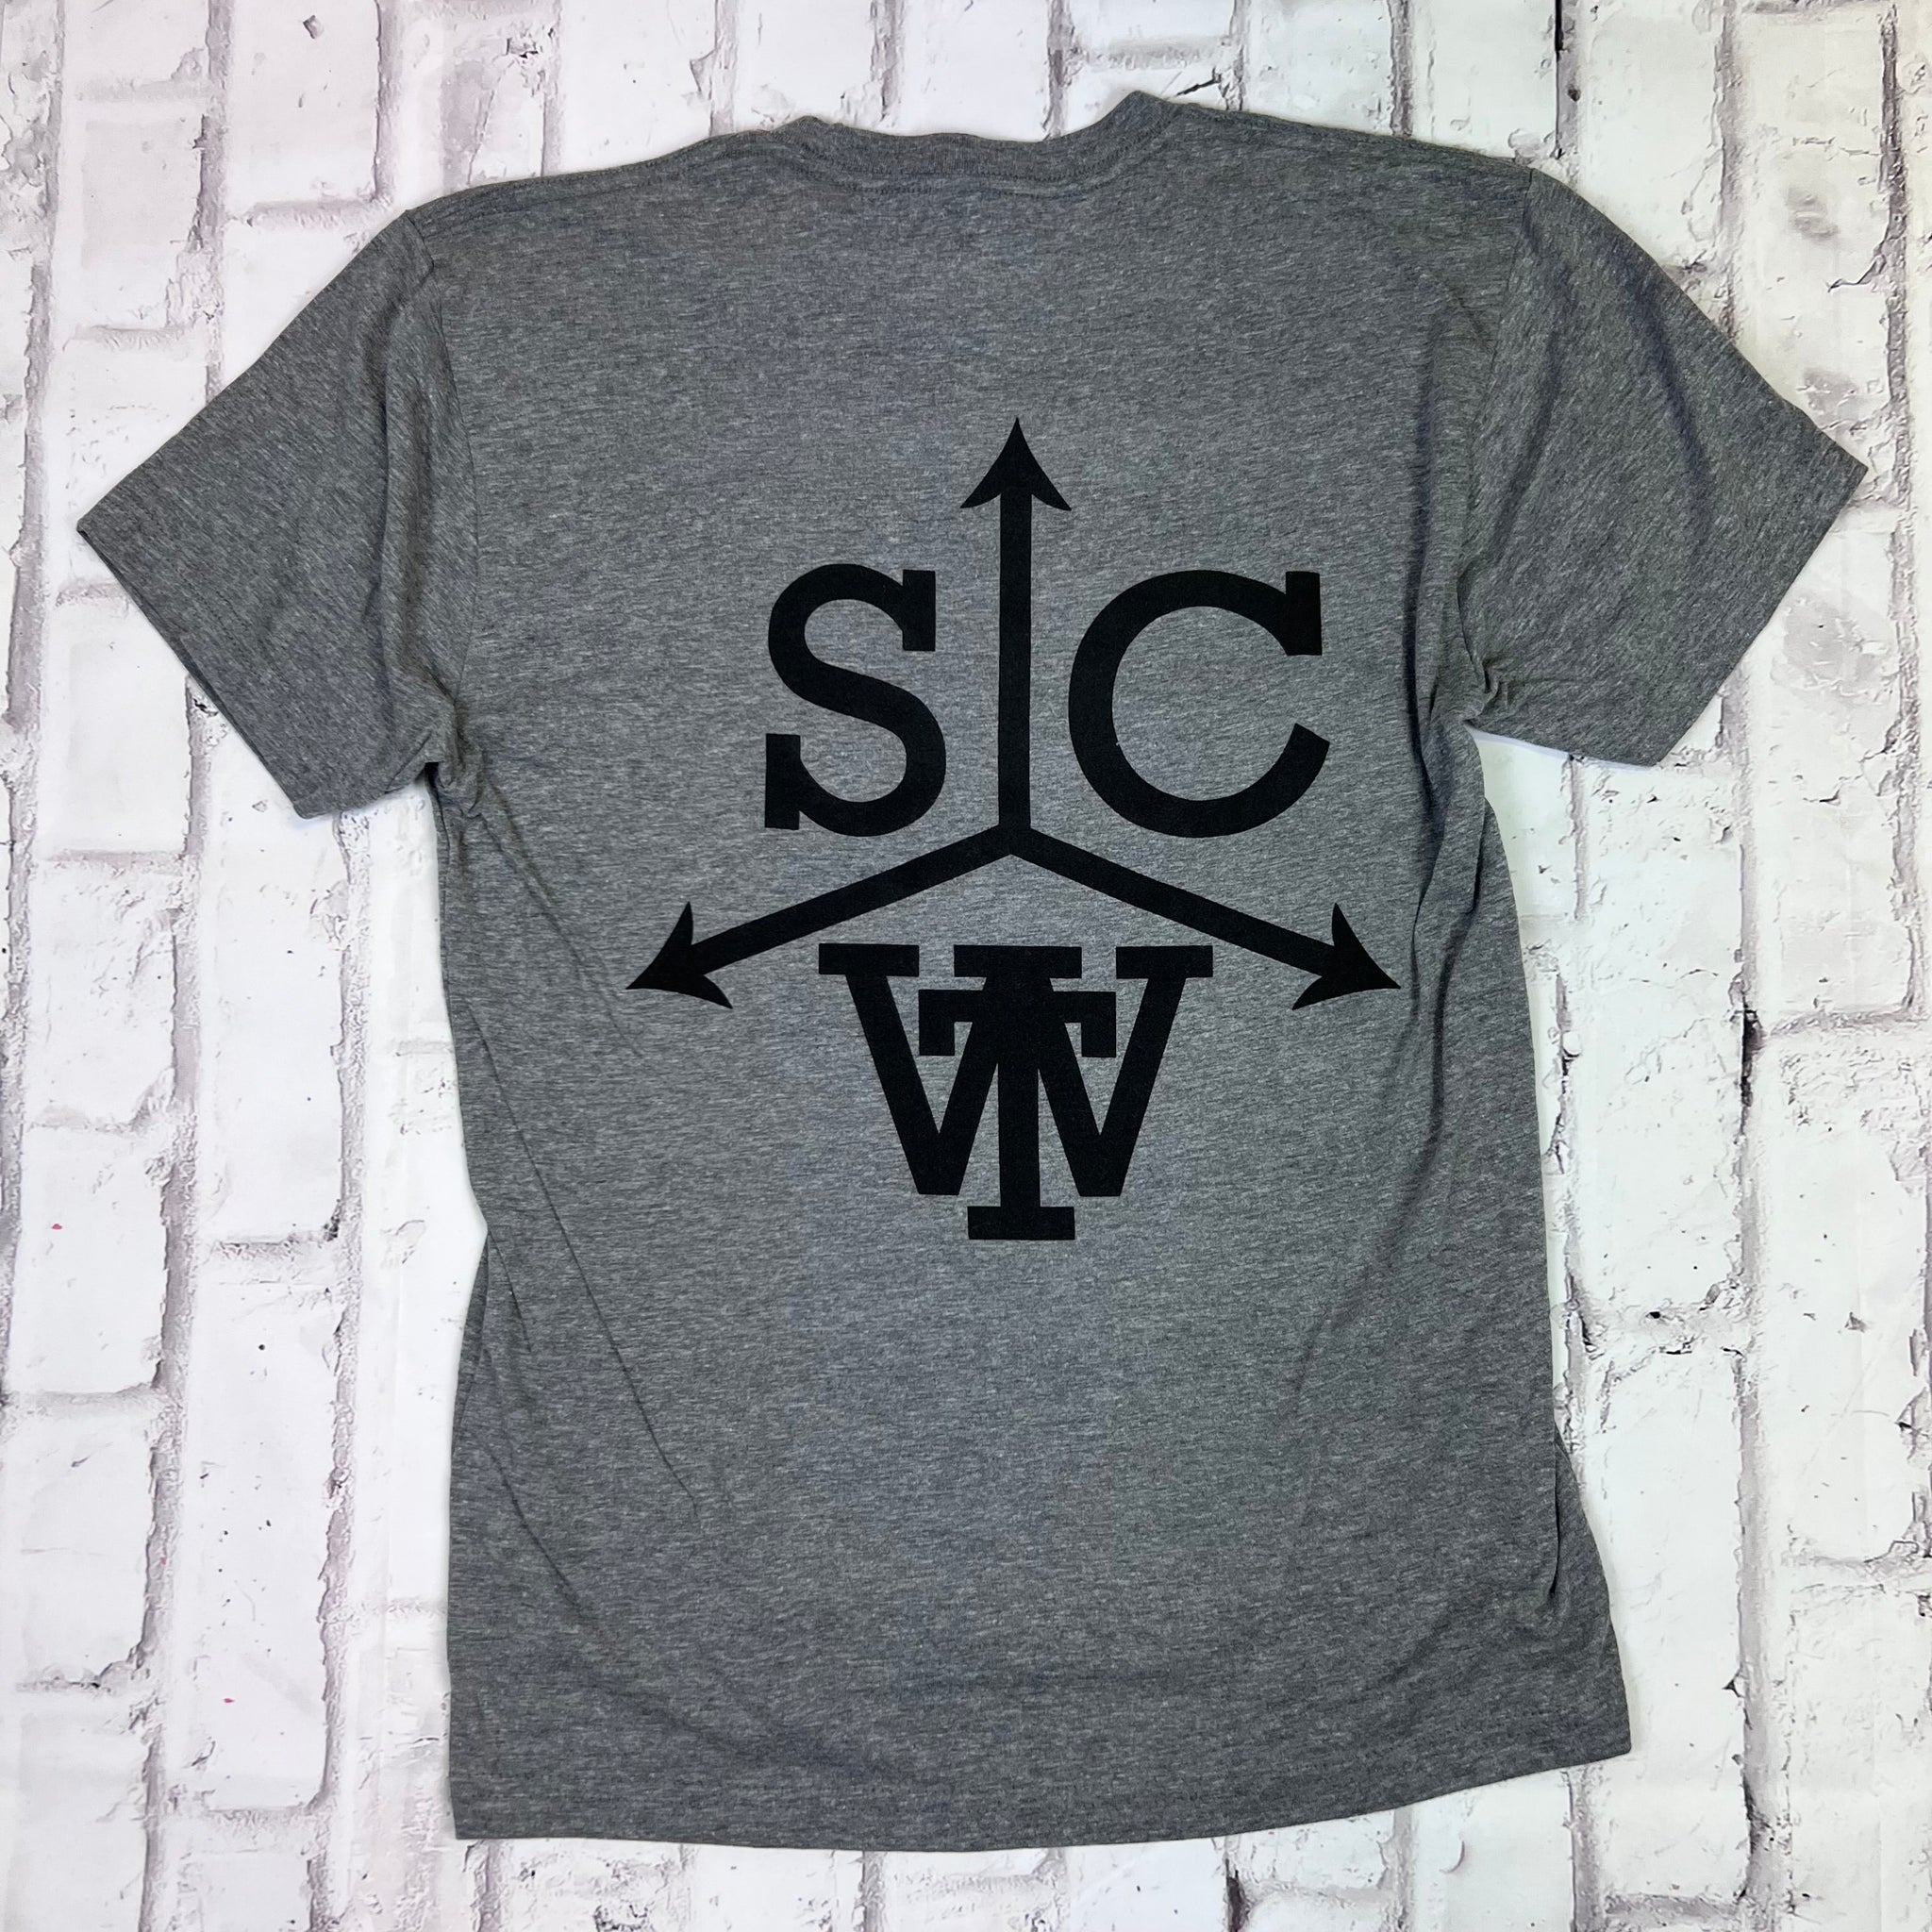 Southern Charm "Cattle Brand" Short Sleeve T-shirt - Heather Gray